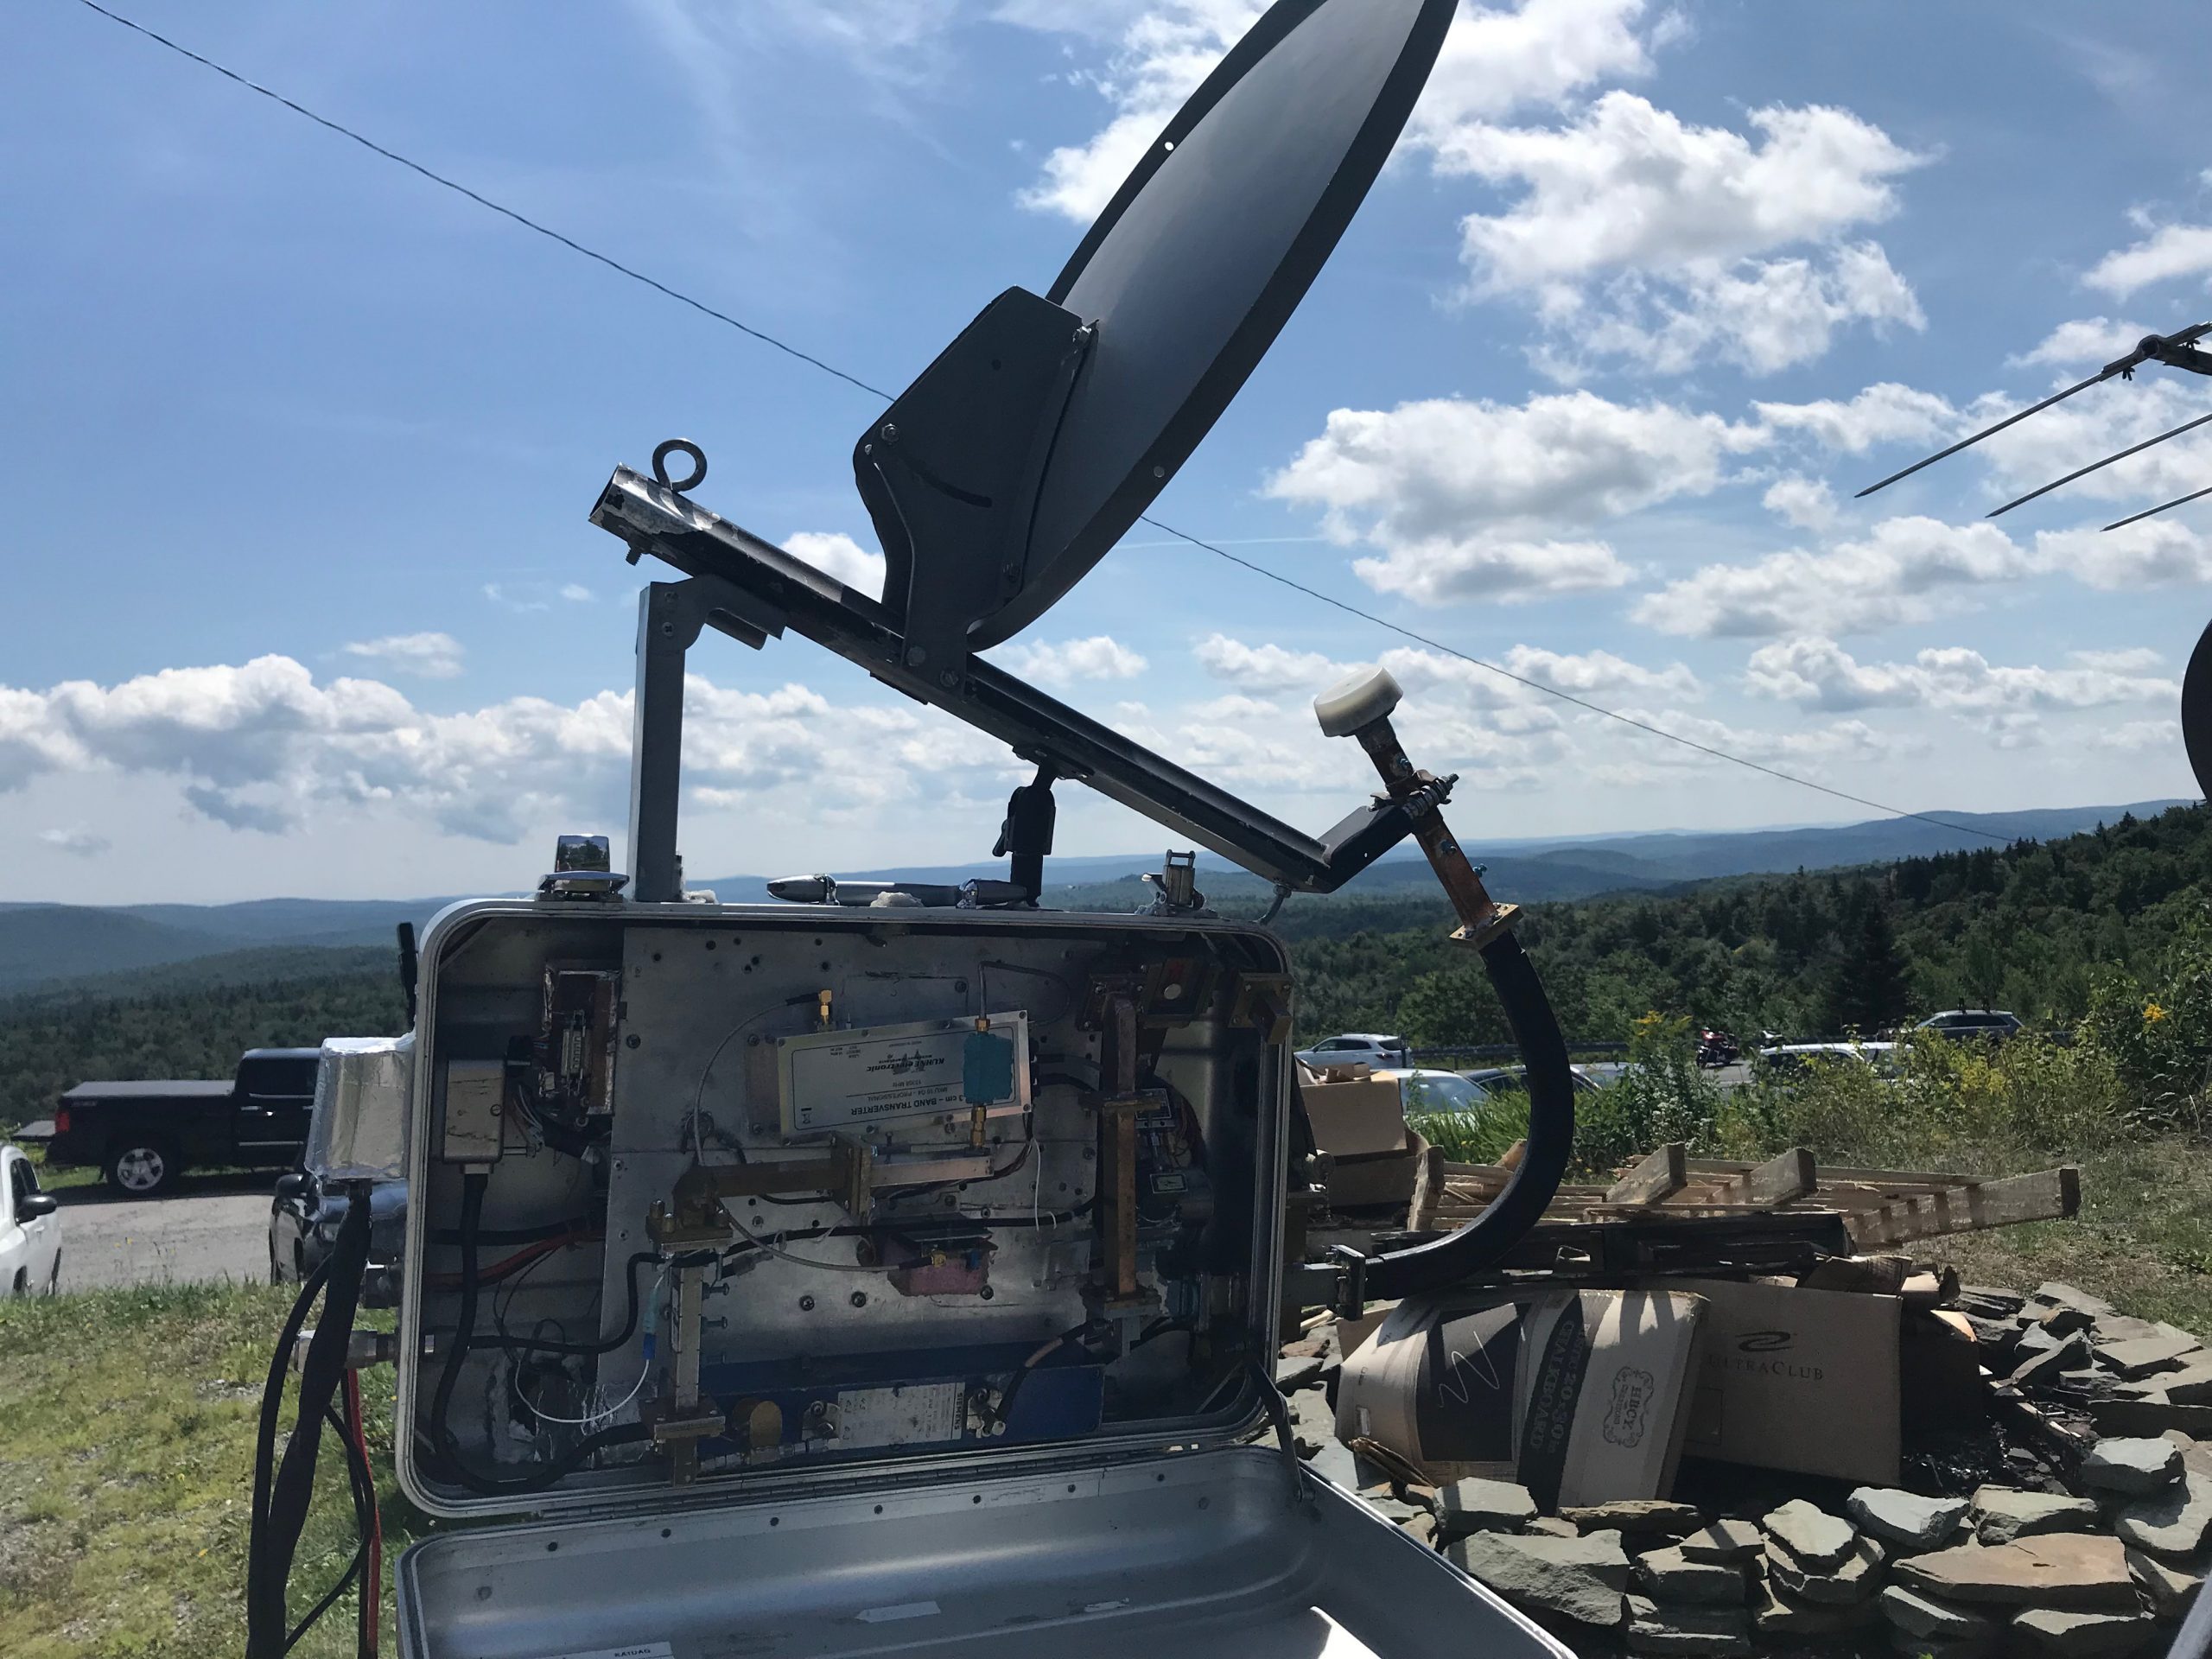 2019 Arrl 10 Ghz And Up Contest